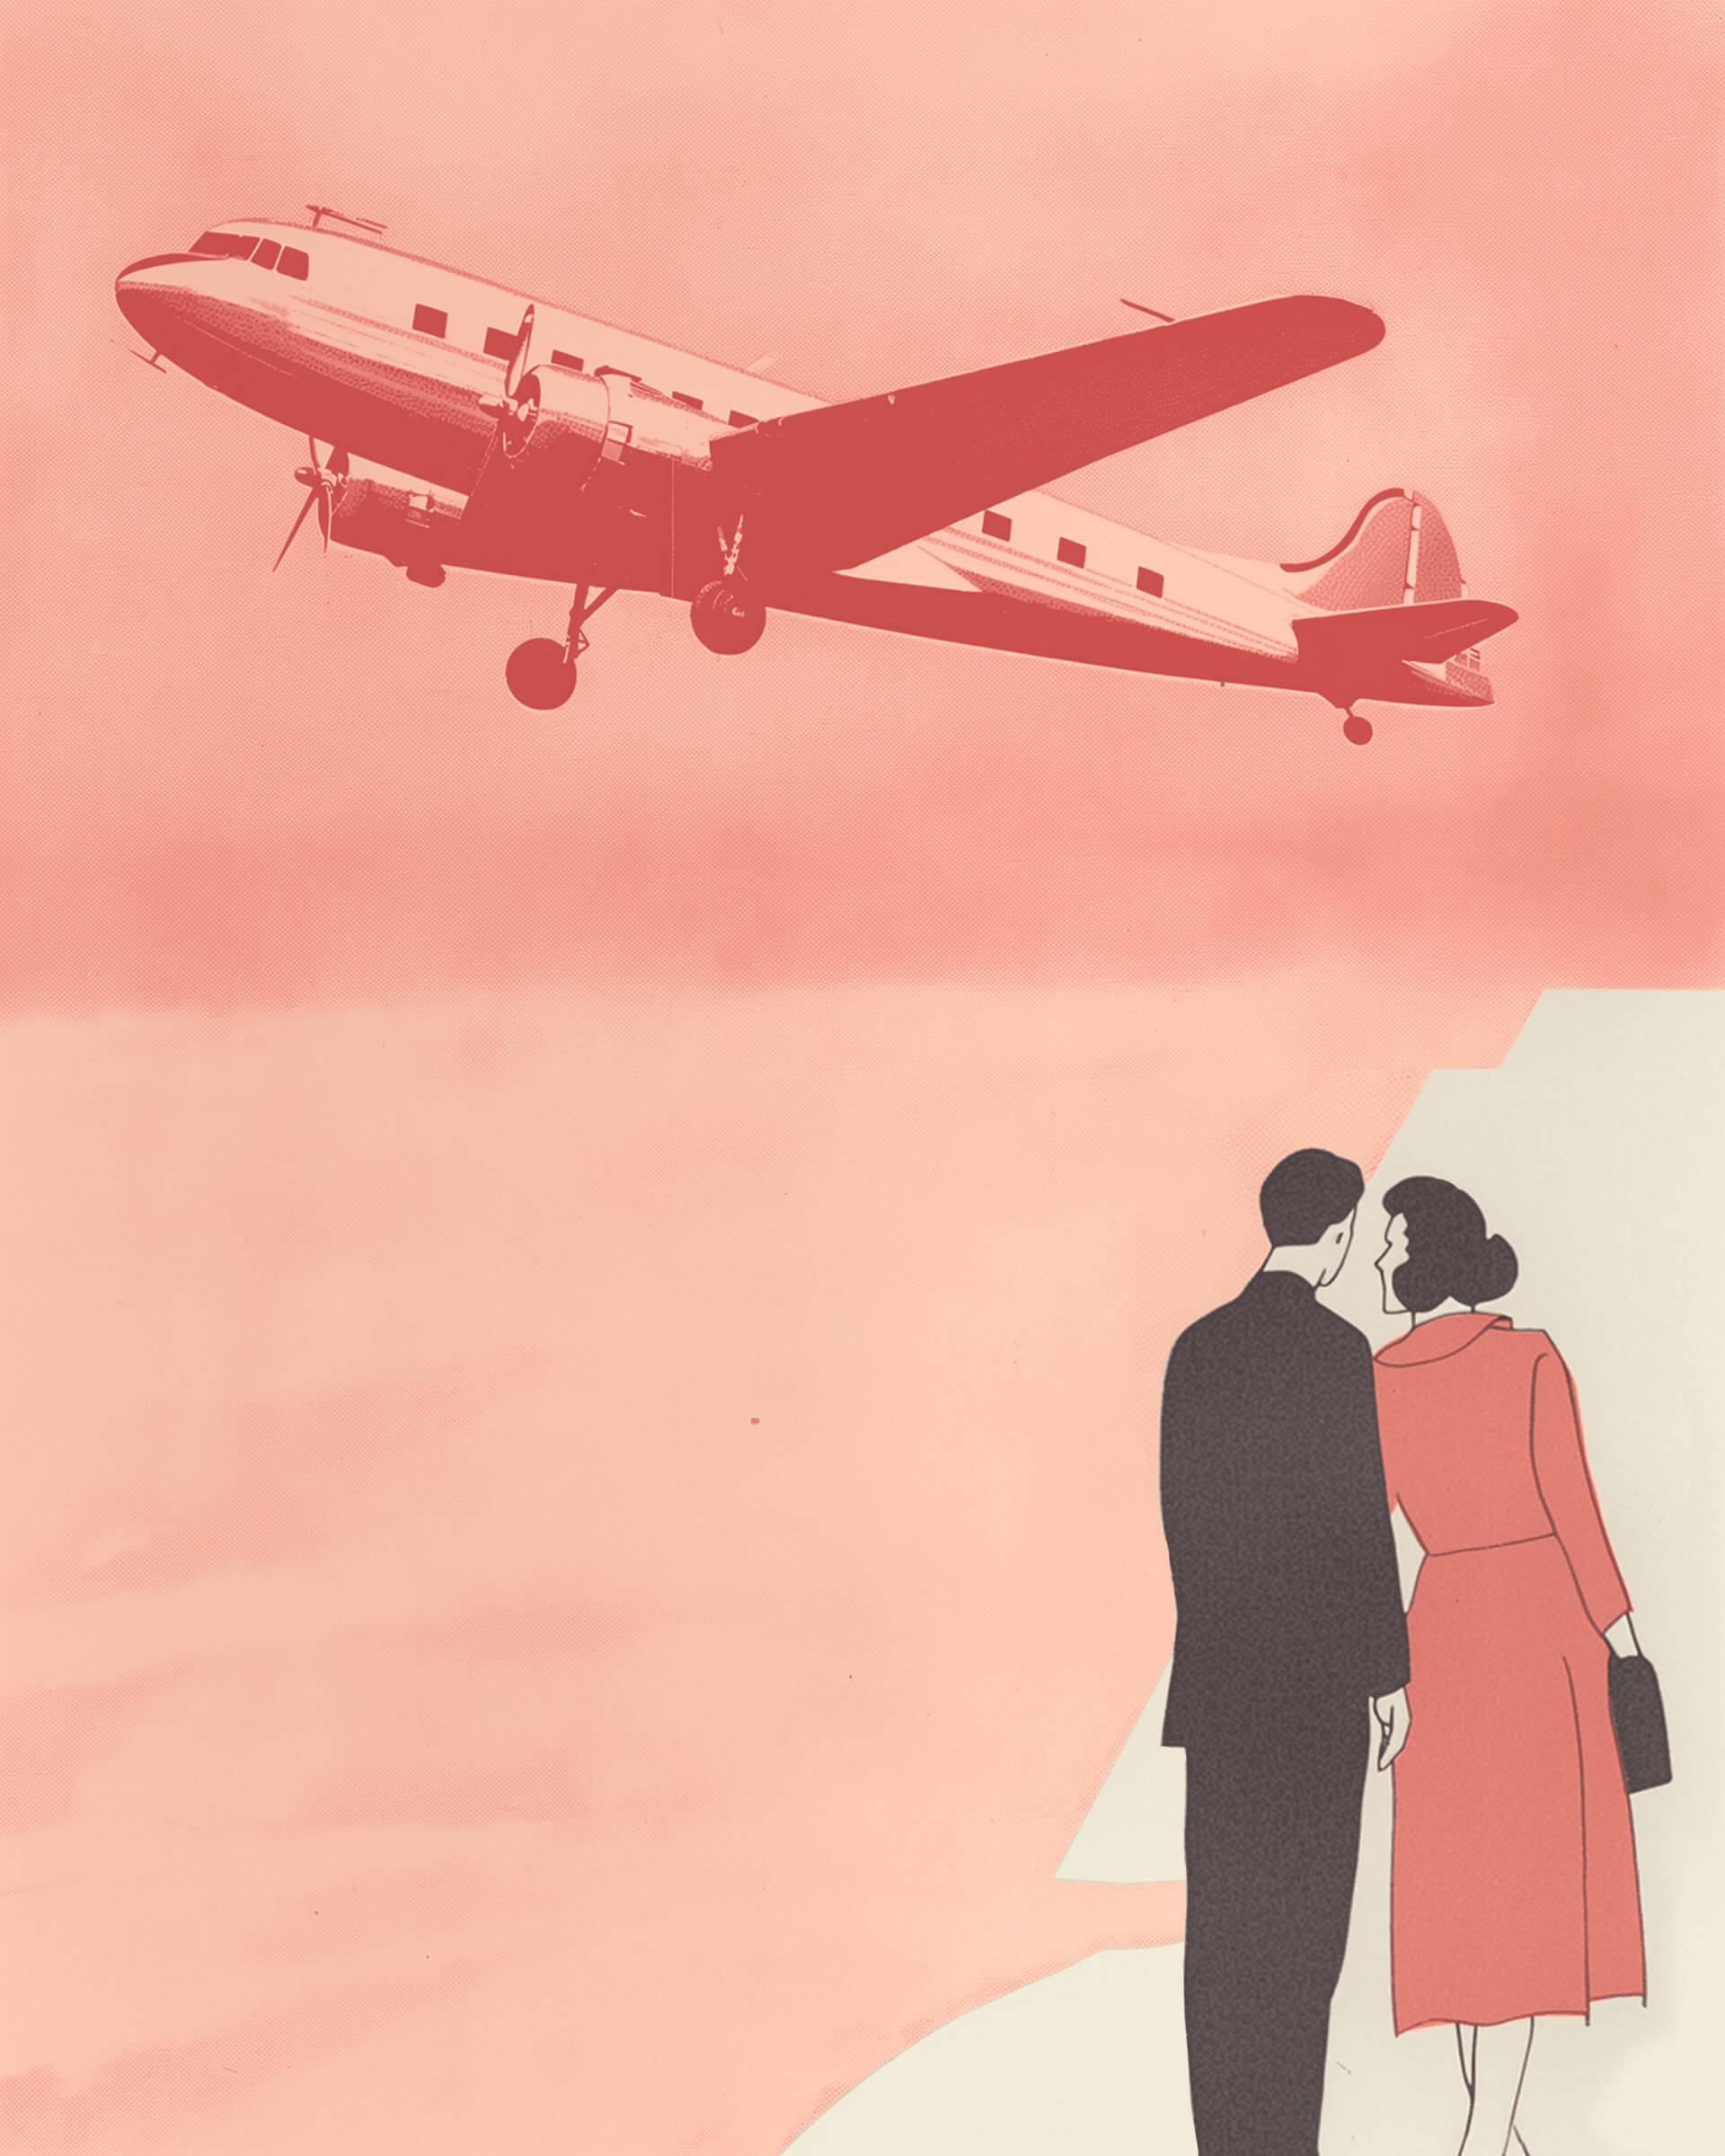 Busting Myths - Website Projects - Plane and Couple 